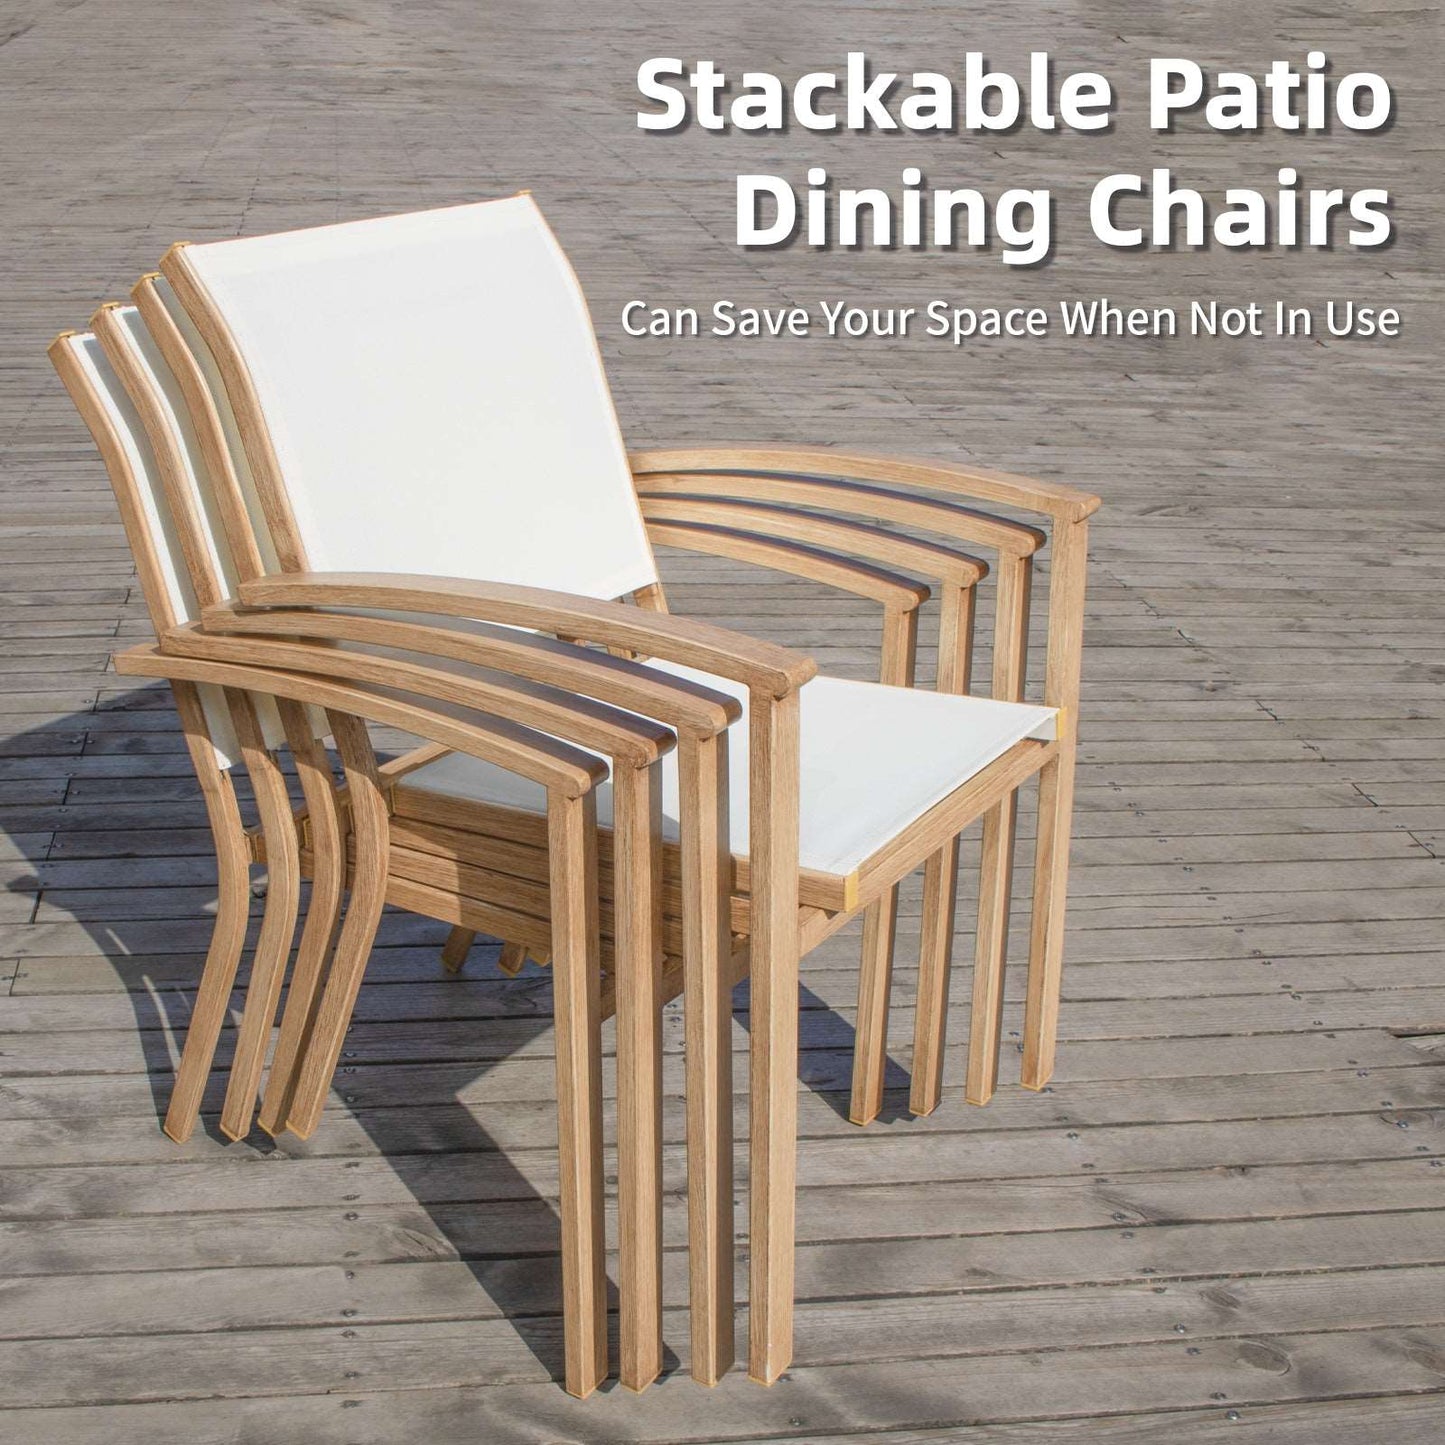 nadadi-outdoor-dining-chairs-Stackable-patio-dining-chairs-2D